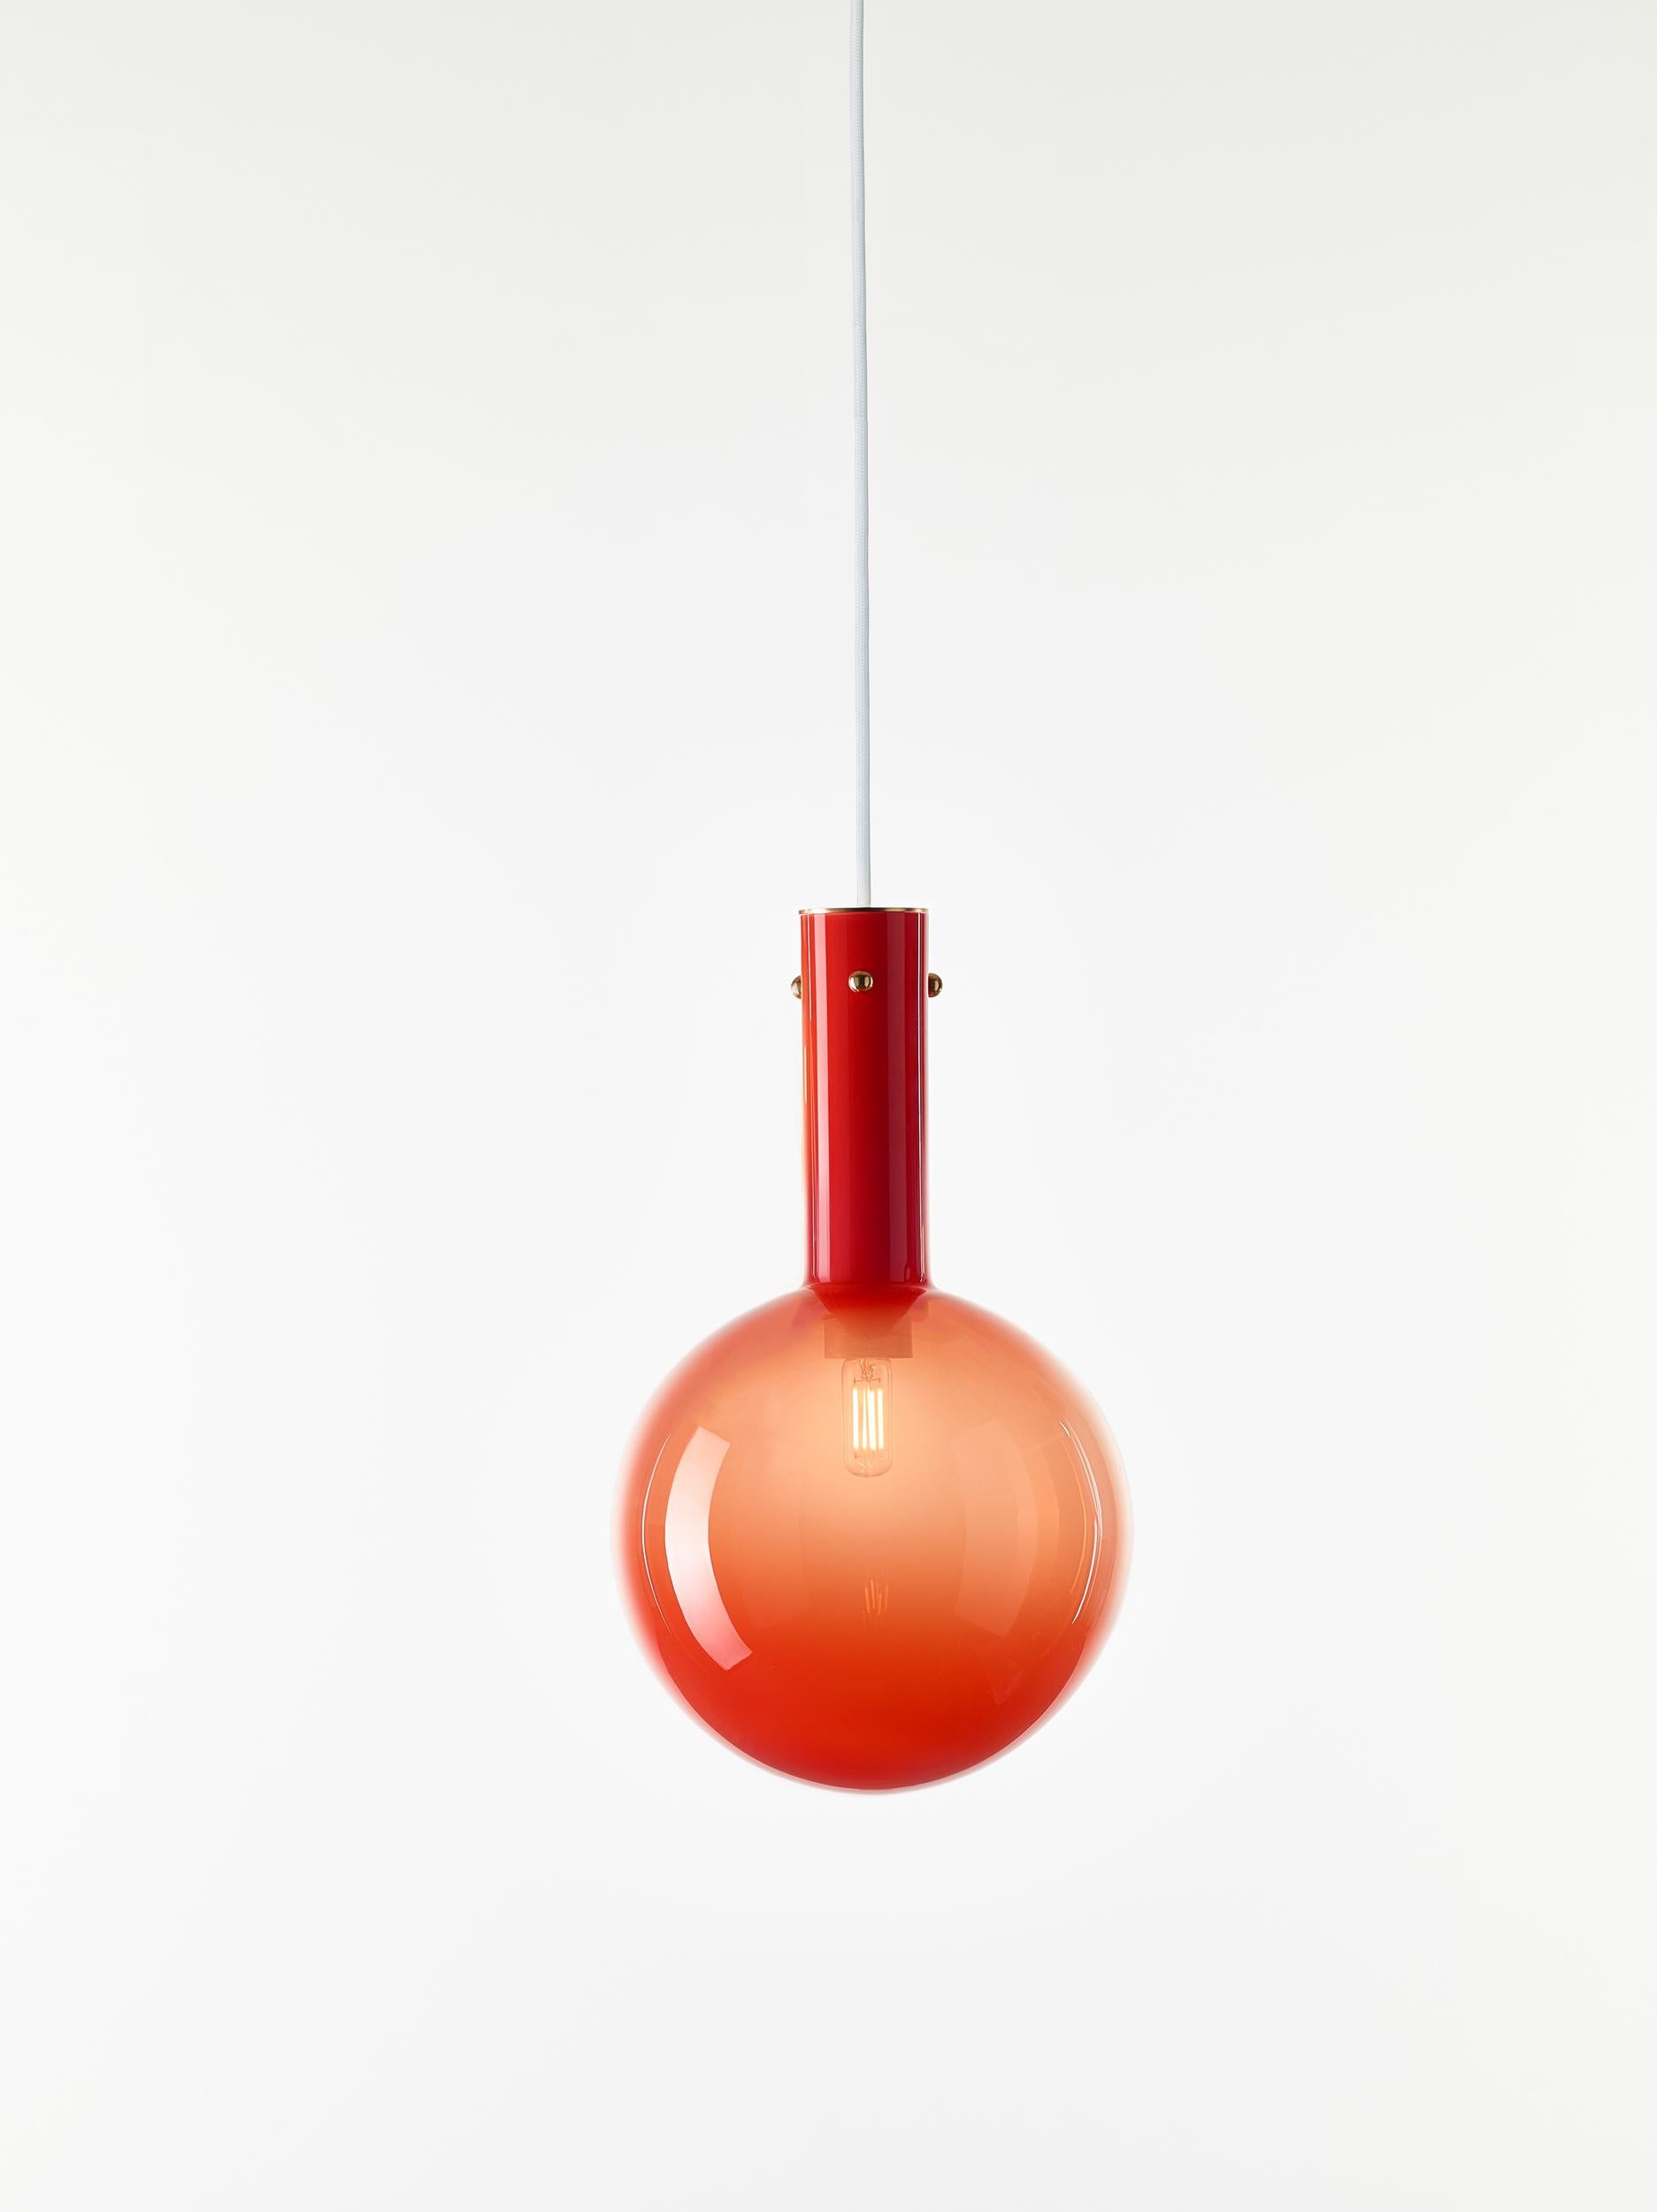 Red sphaerae pendant light by Dechem Studio
Dimensions: D 20 x H 180 cm
Materials: brass, metal, glass.
Also available: different finishes and colors available.
Only one homogenous piece of hand blown glass creates the main body of Sphaerae light